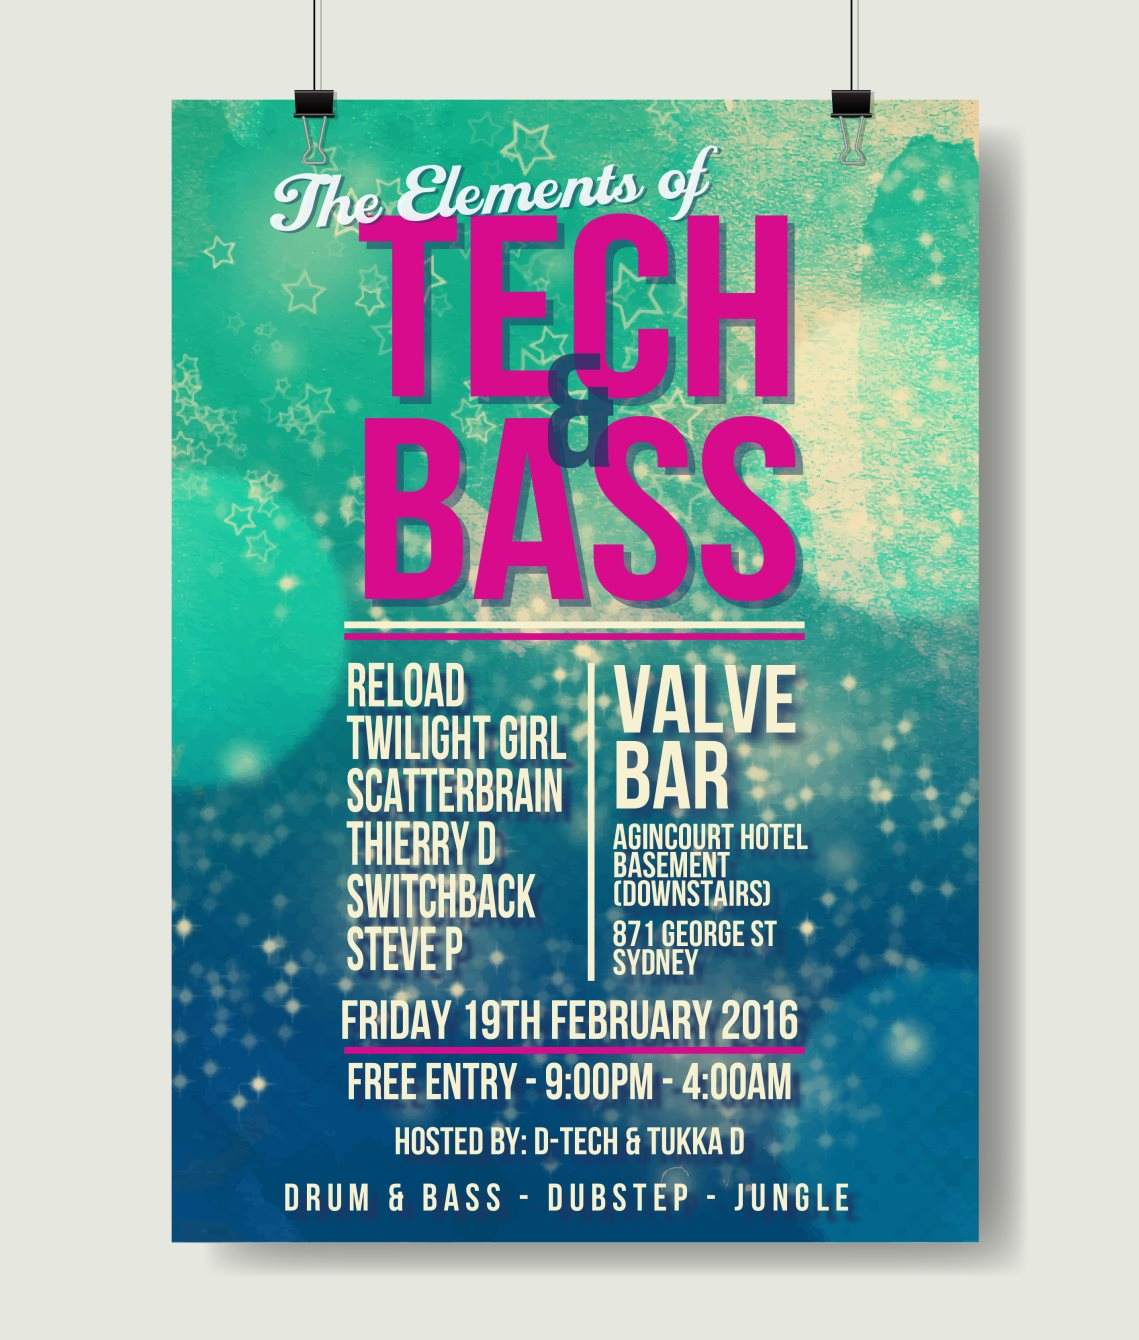 The Elements Of Tech & Bass .: Free Entry : - Página frontal